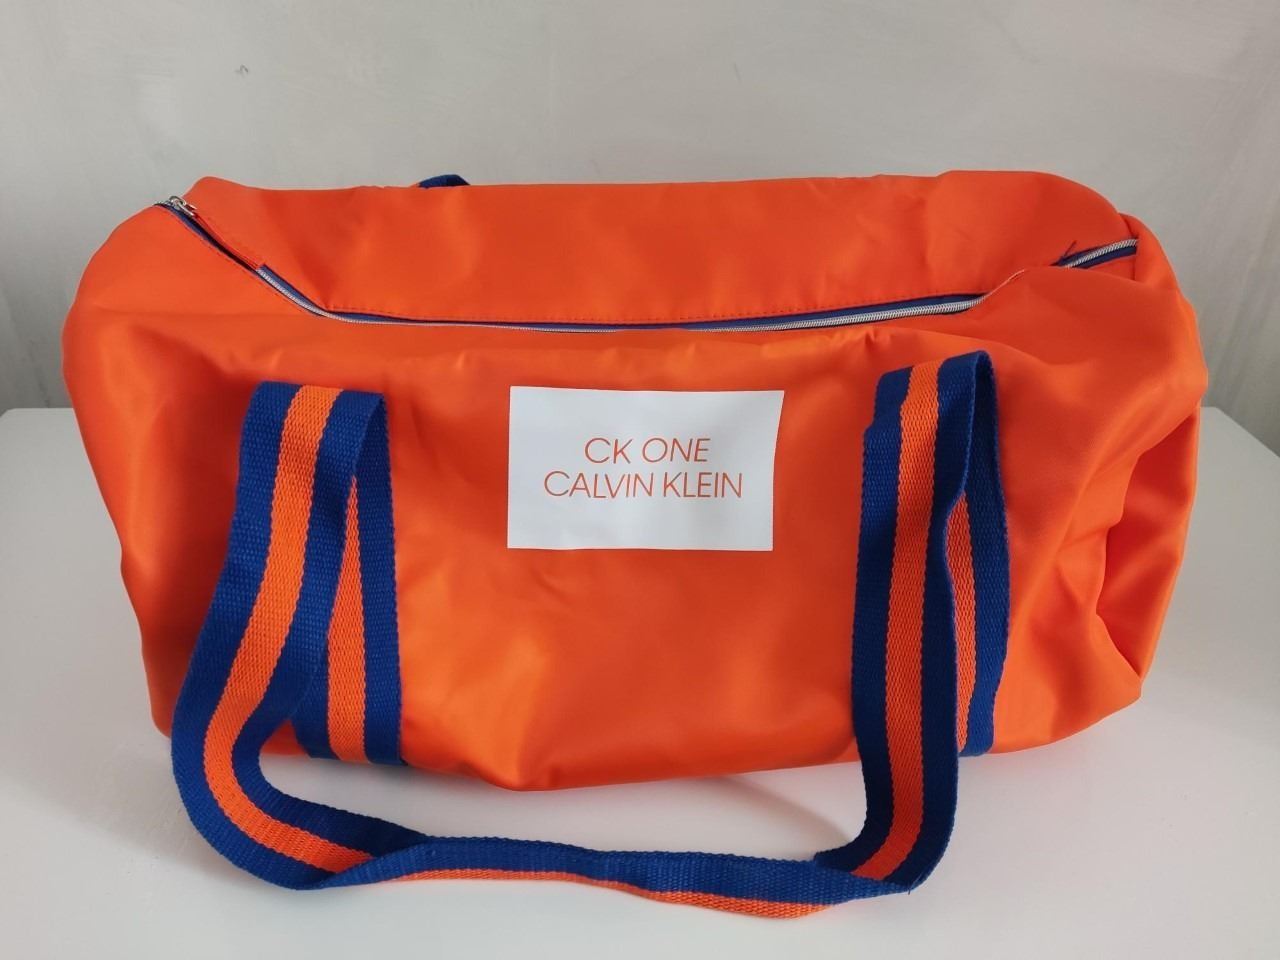 Andy Warhol Les Parfums pour homme and New Calvin Klein CK One orange duffle bag. - Image 2 of 2